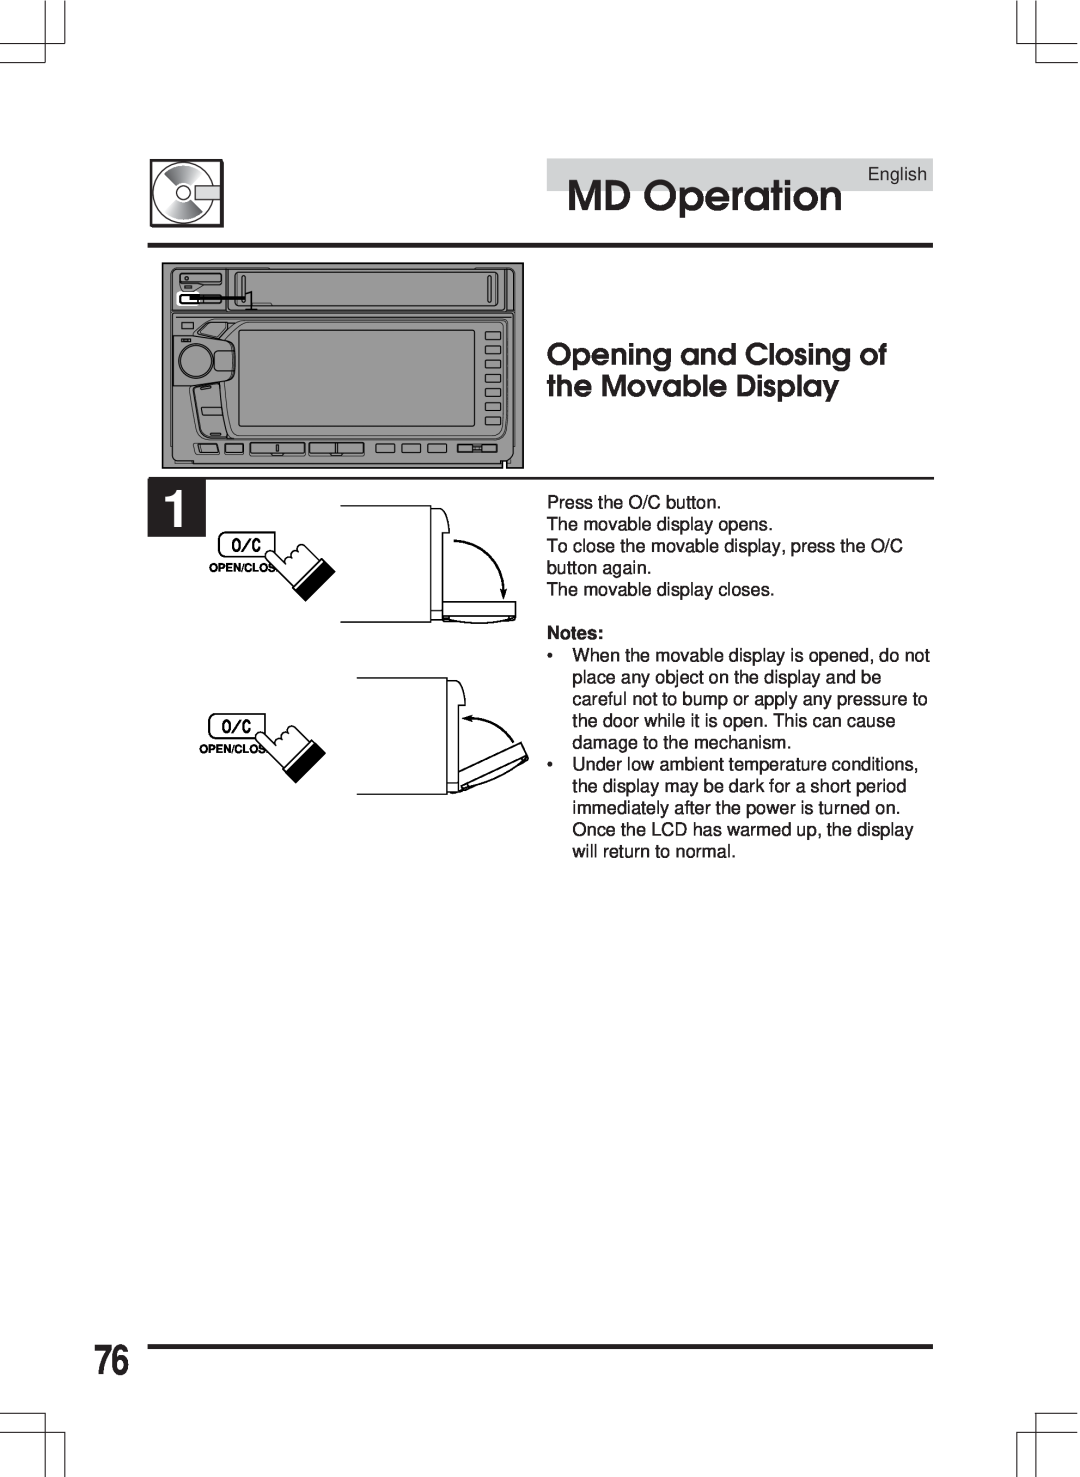 Alpine MDA-W890 owner manual MD Operation English, Opening and Closing of, the Movable Display 